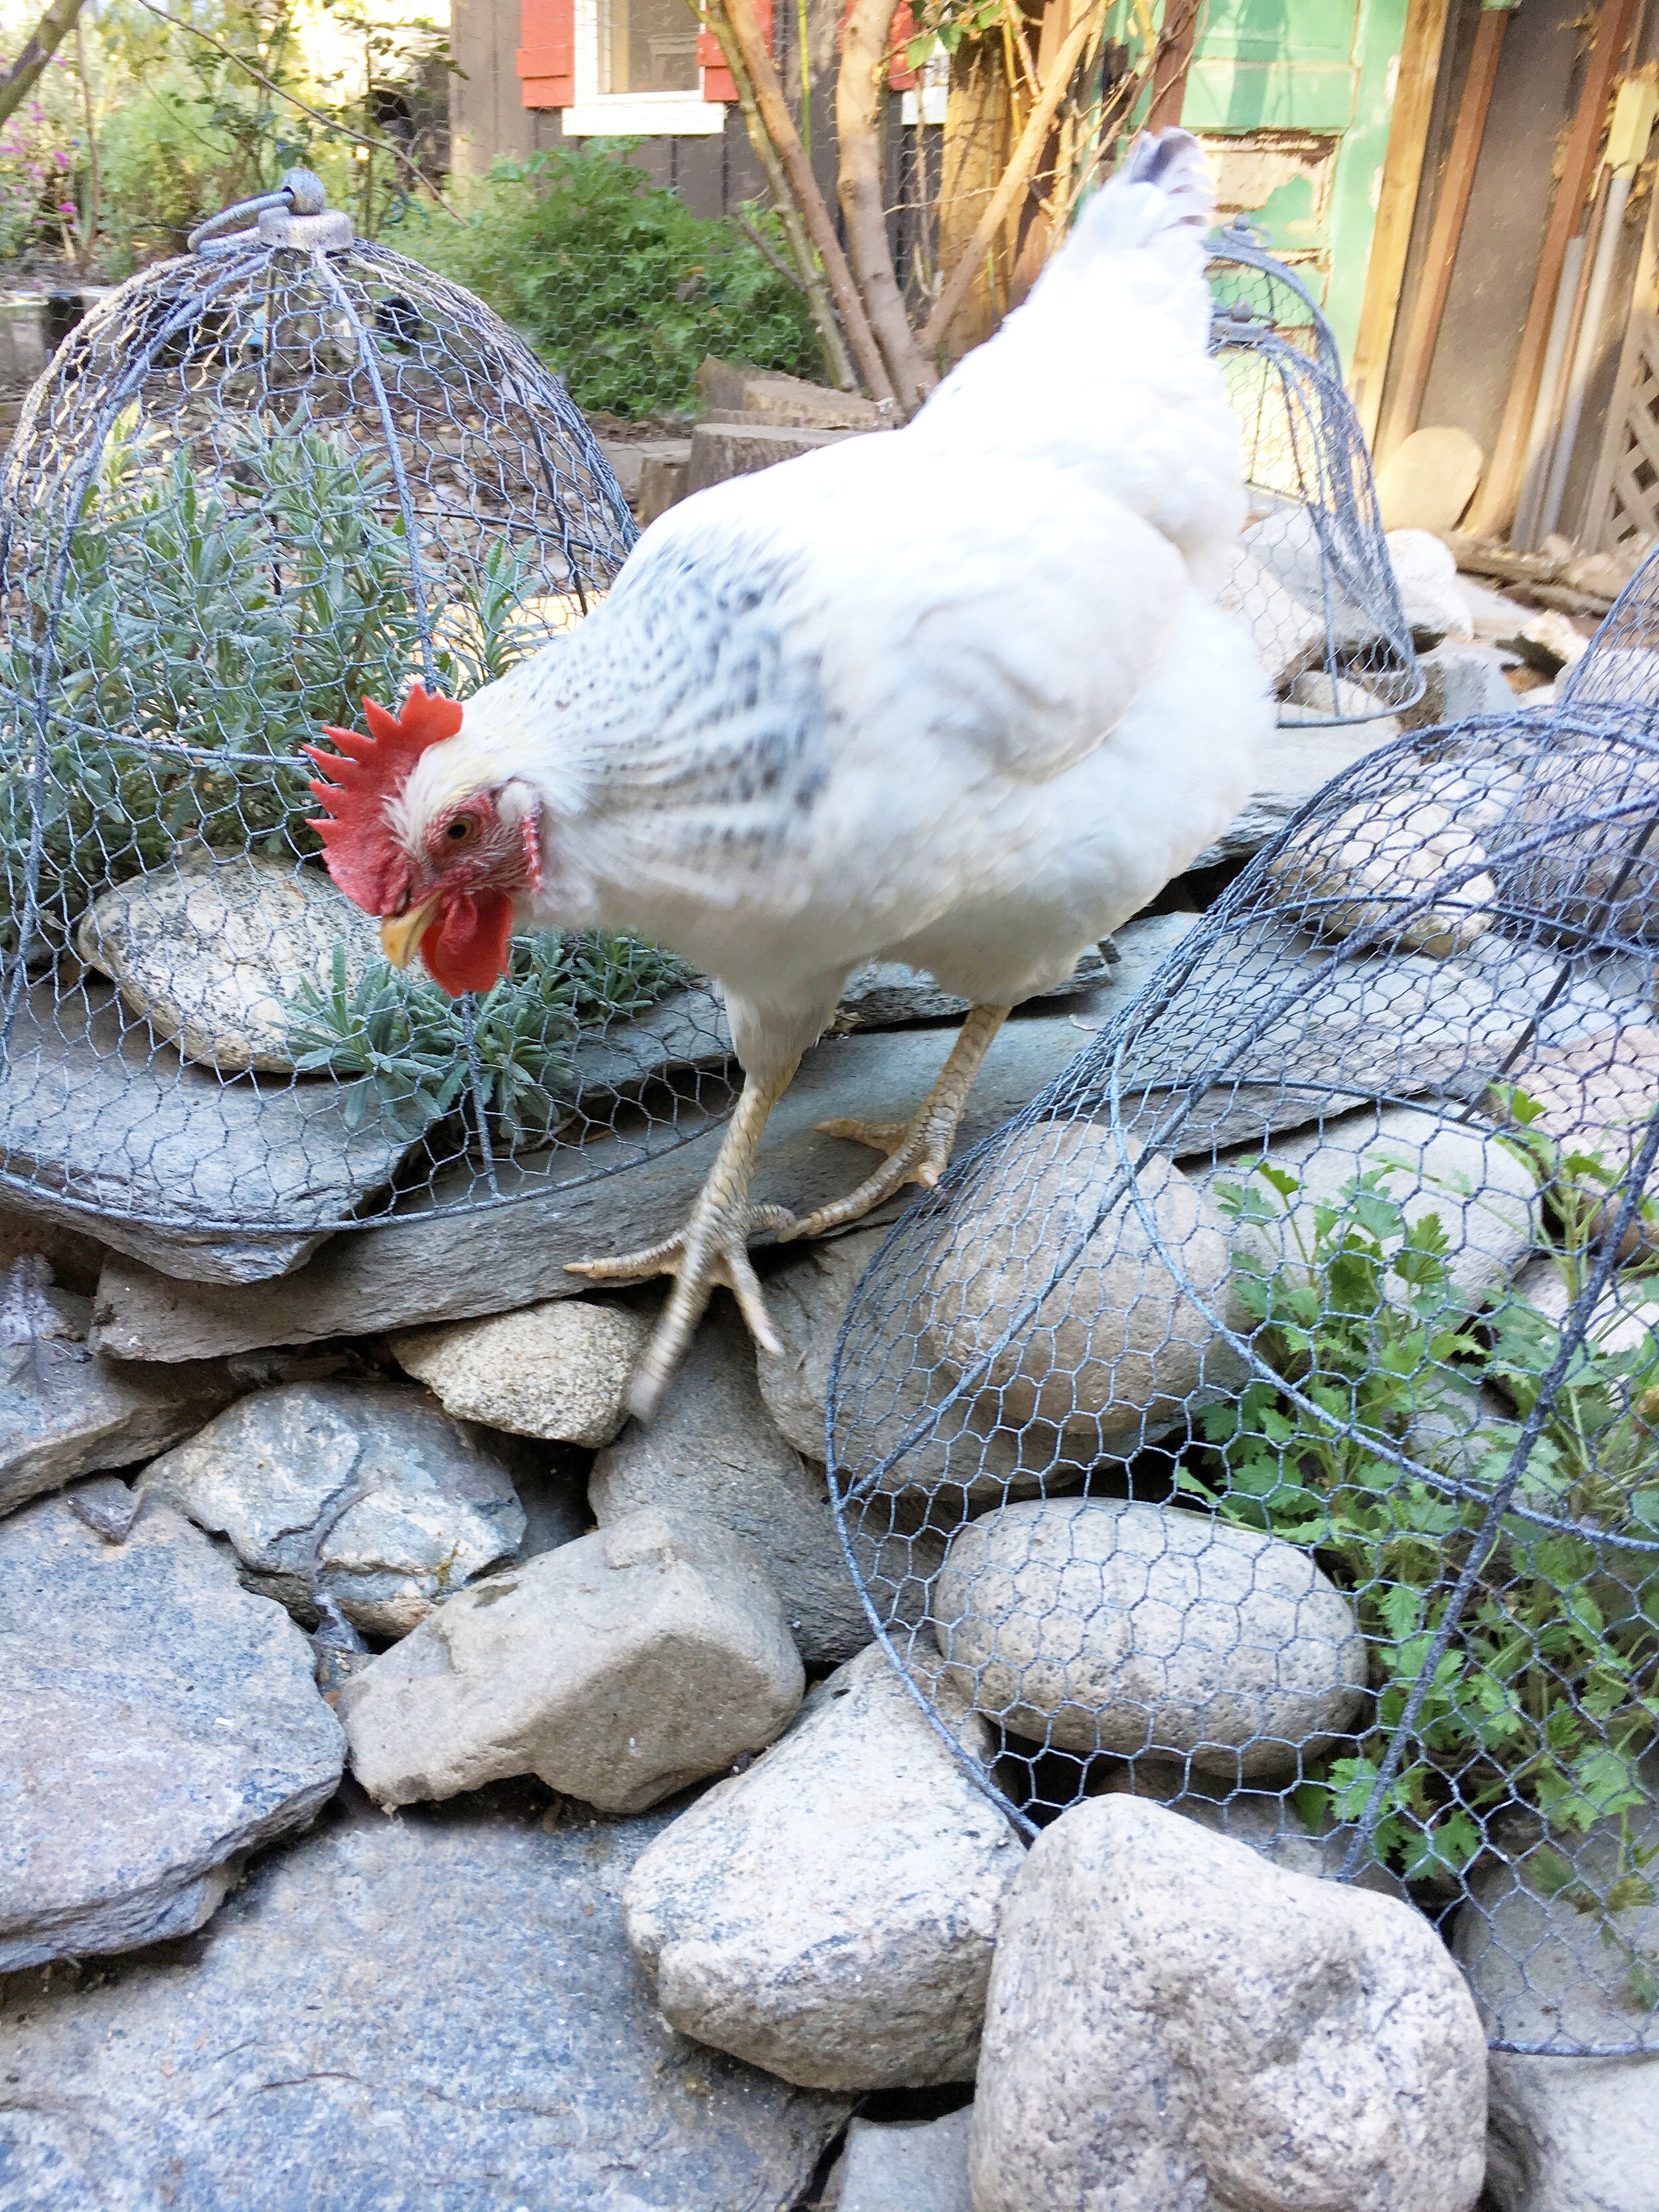 How to Make a DIY Garden Cloche + Gardening with Chickens - Rooted